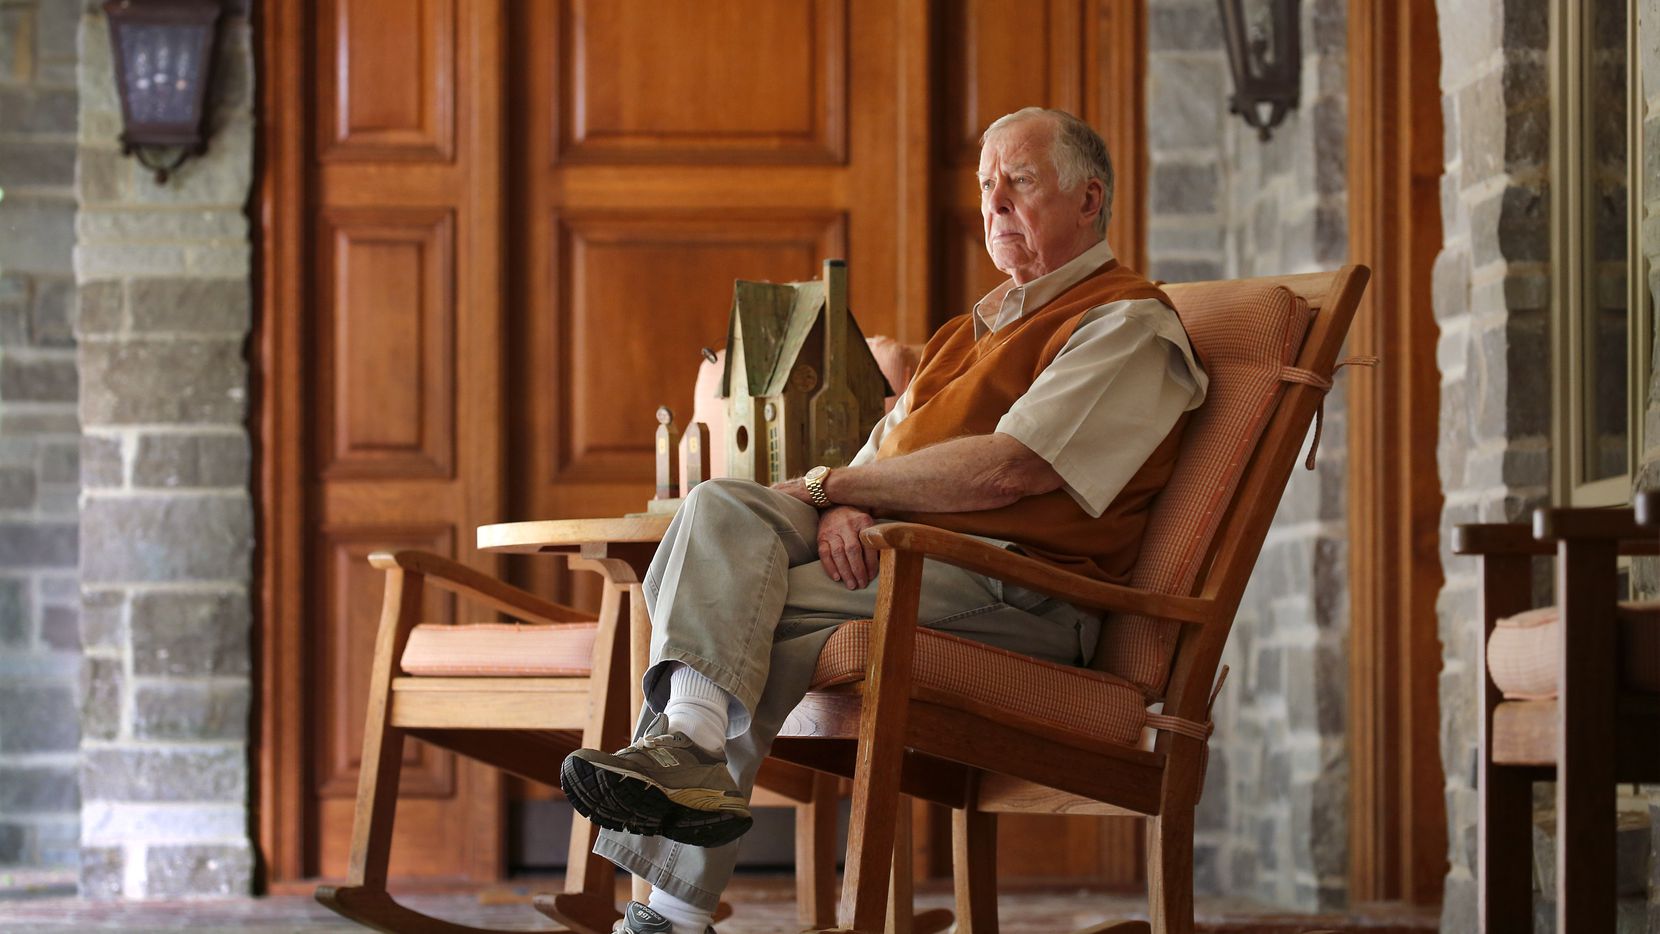 Dallas businessman and philanthropist T. Boone Pickens was pictured outside living quarters...